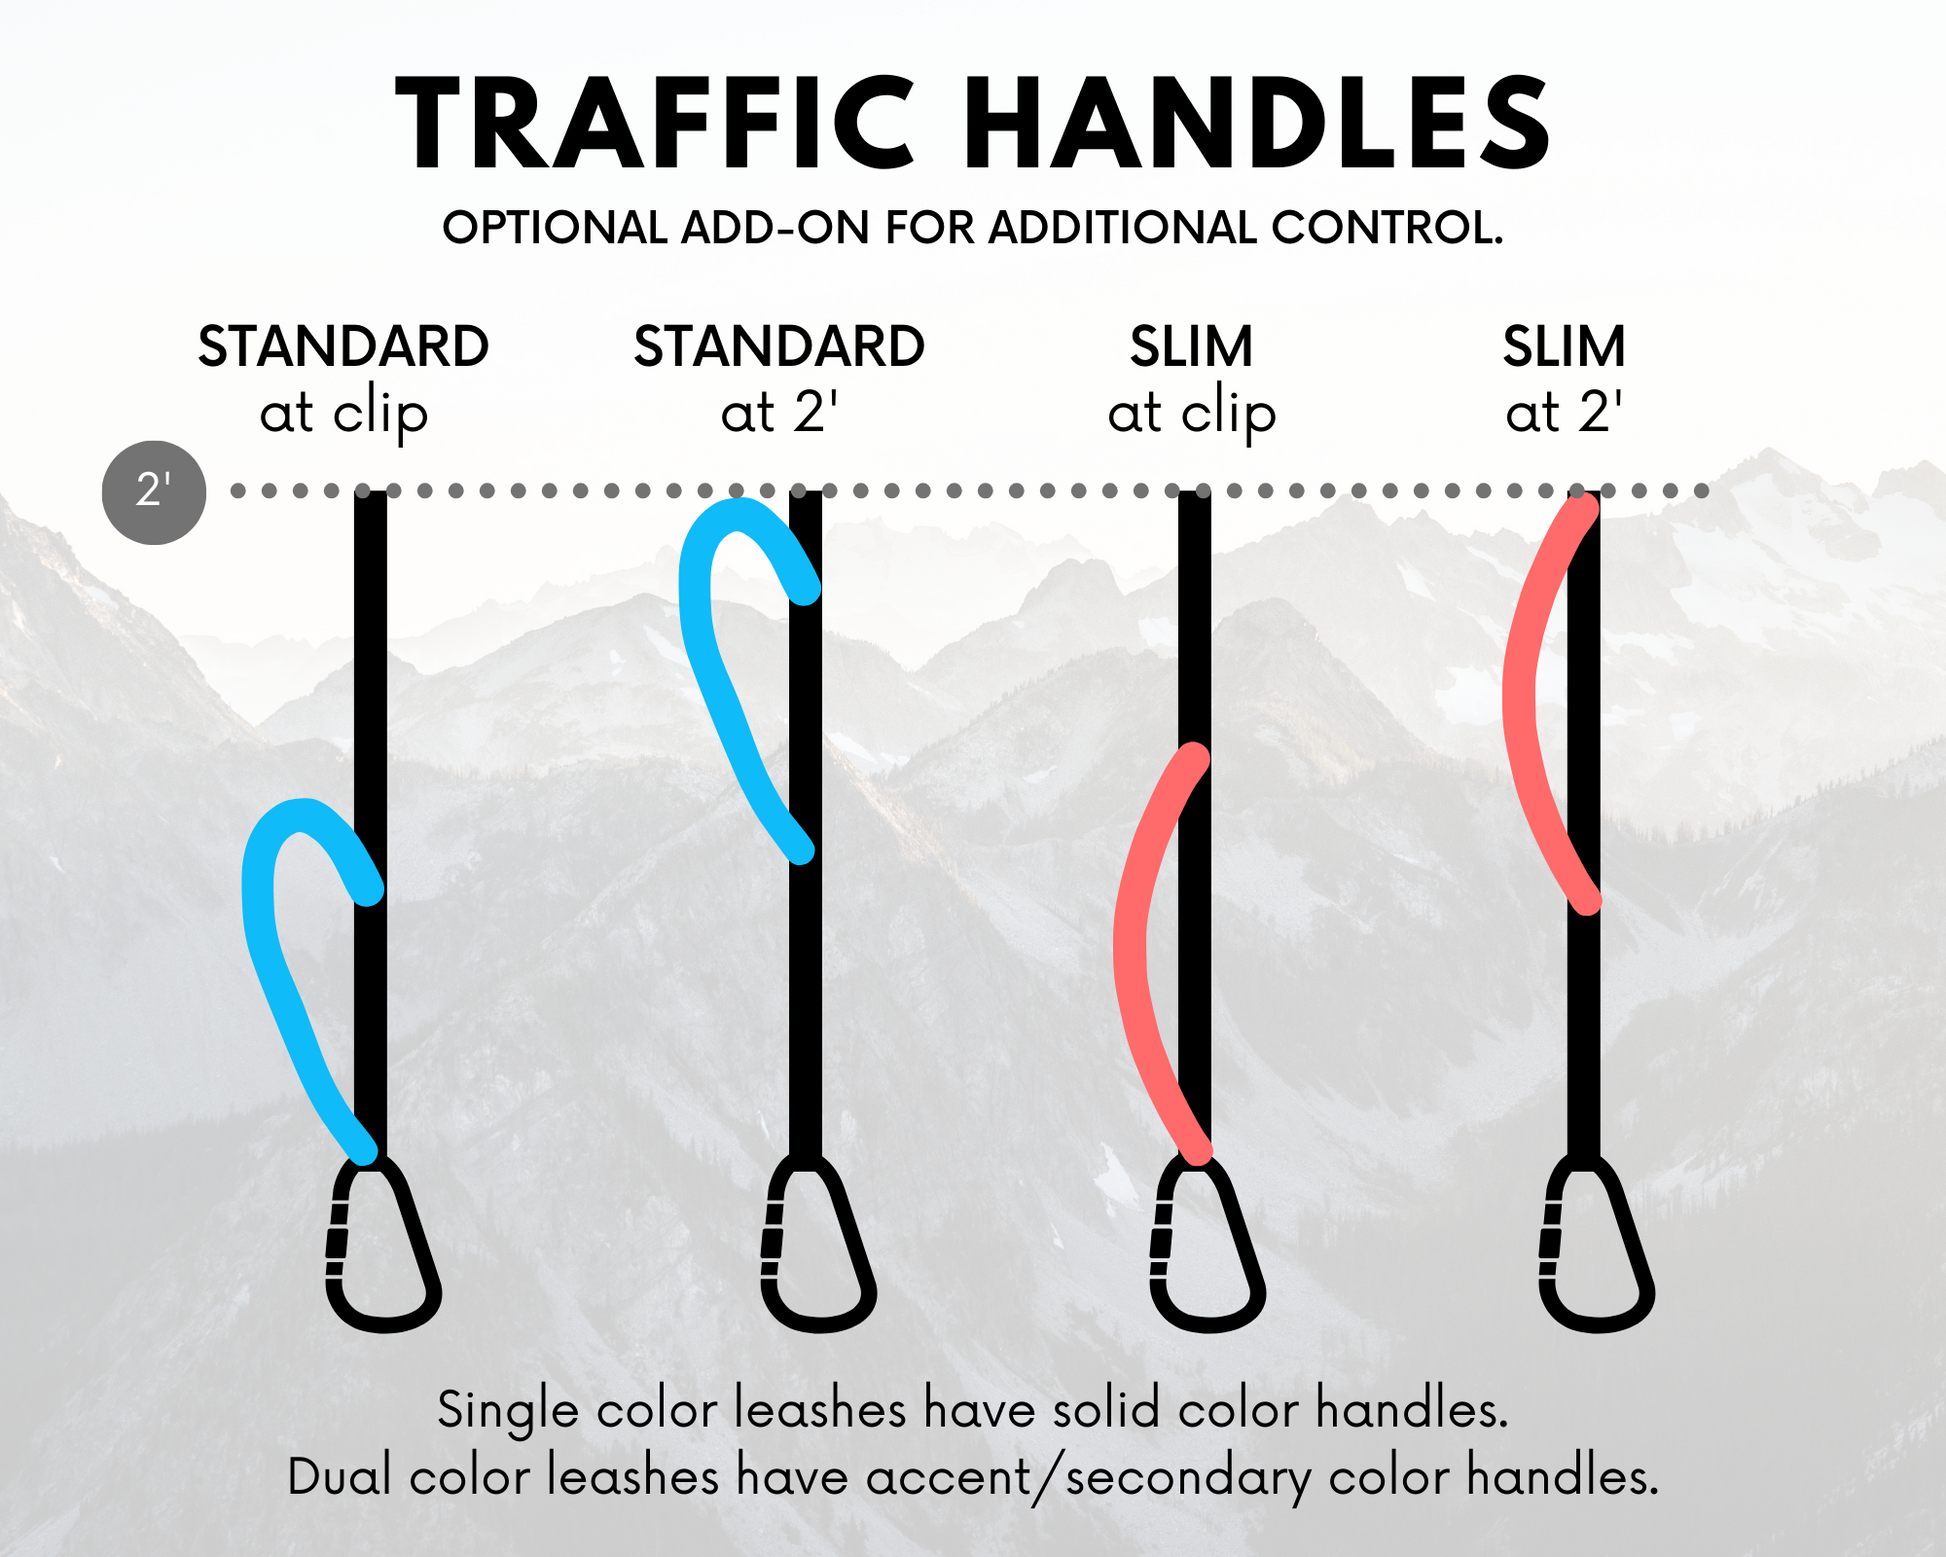 various traffic handle types displayed as an infographic.